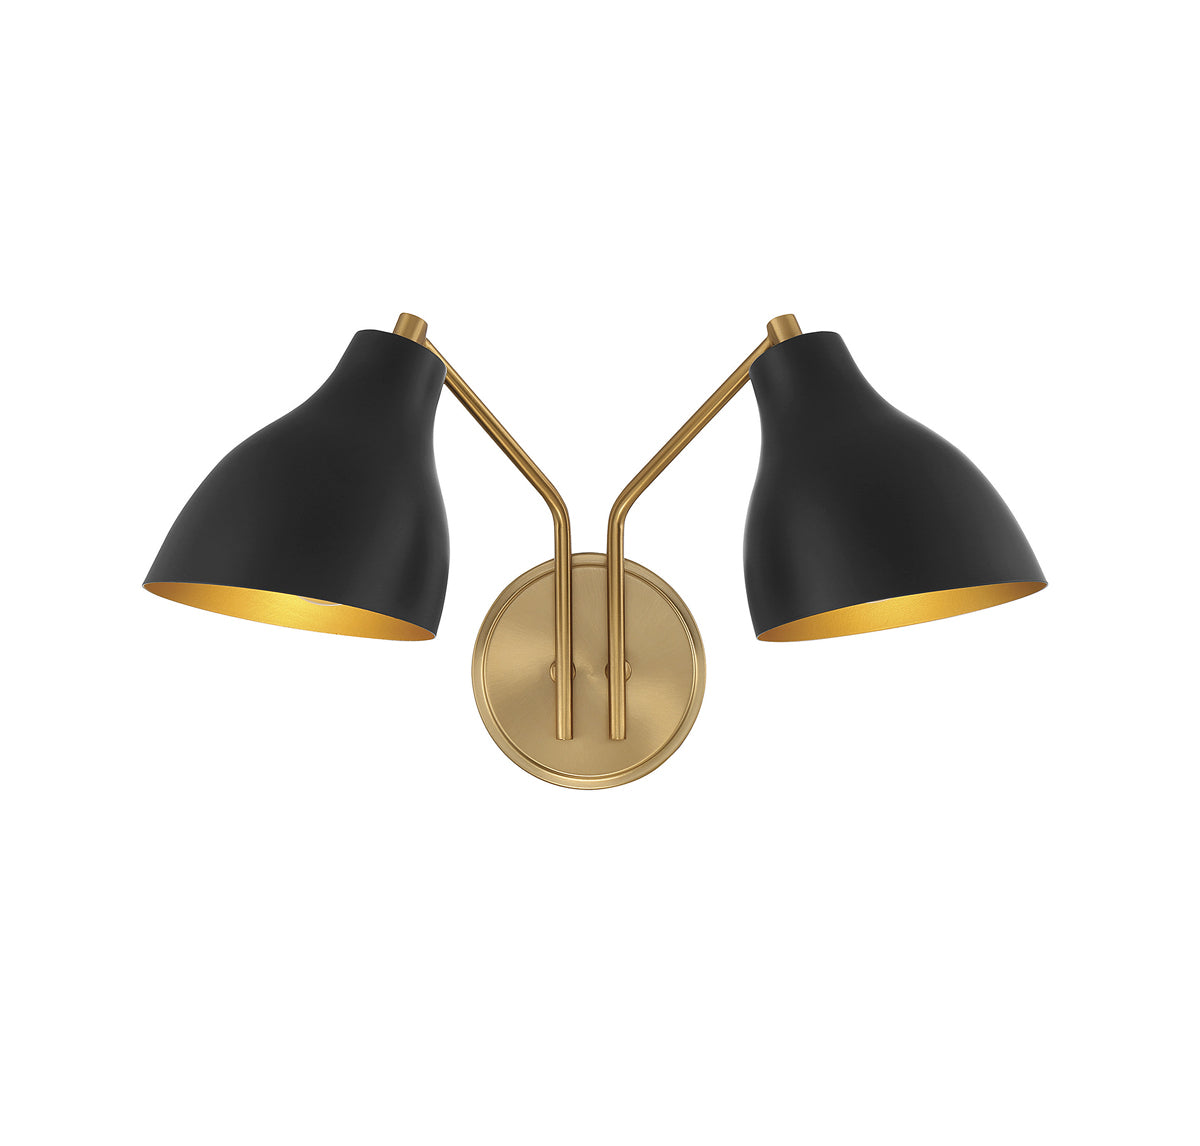 Meridian (M90075MBKNB) 2-Light Wall Sconce in Matte Black with Natural Brass